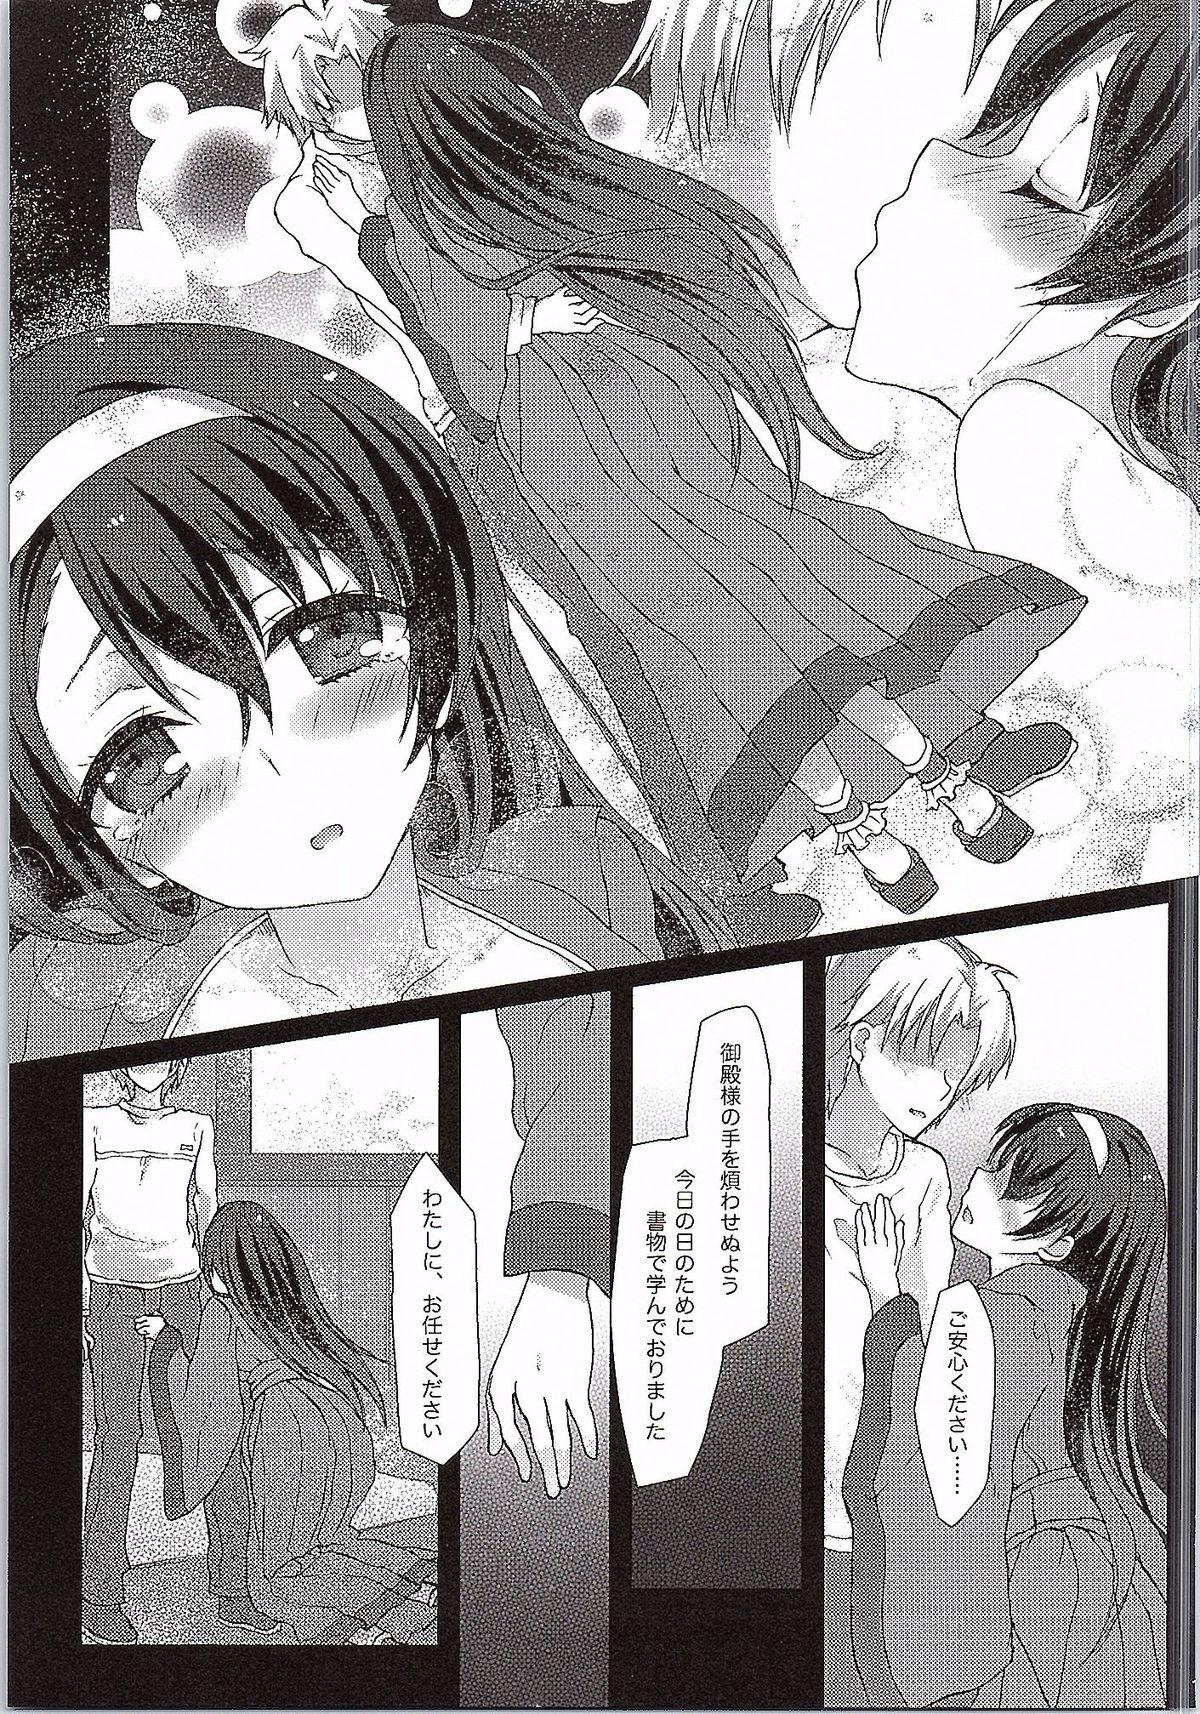 Edging AND THEY LIVED happily ever after...001 - Oshiro project Amazing - Page 10